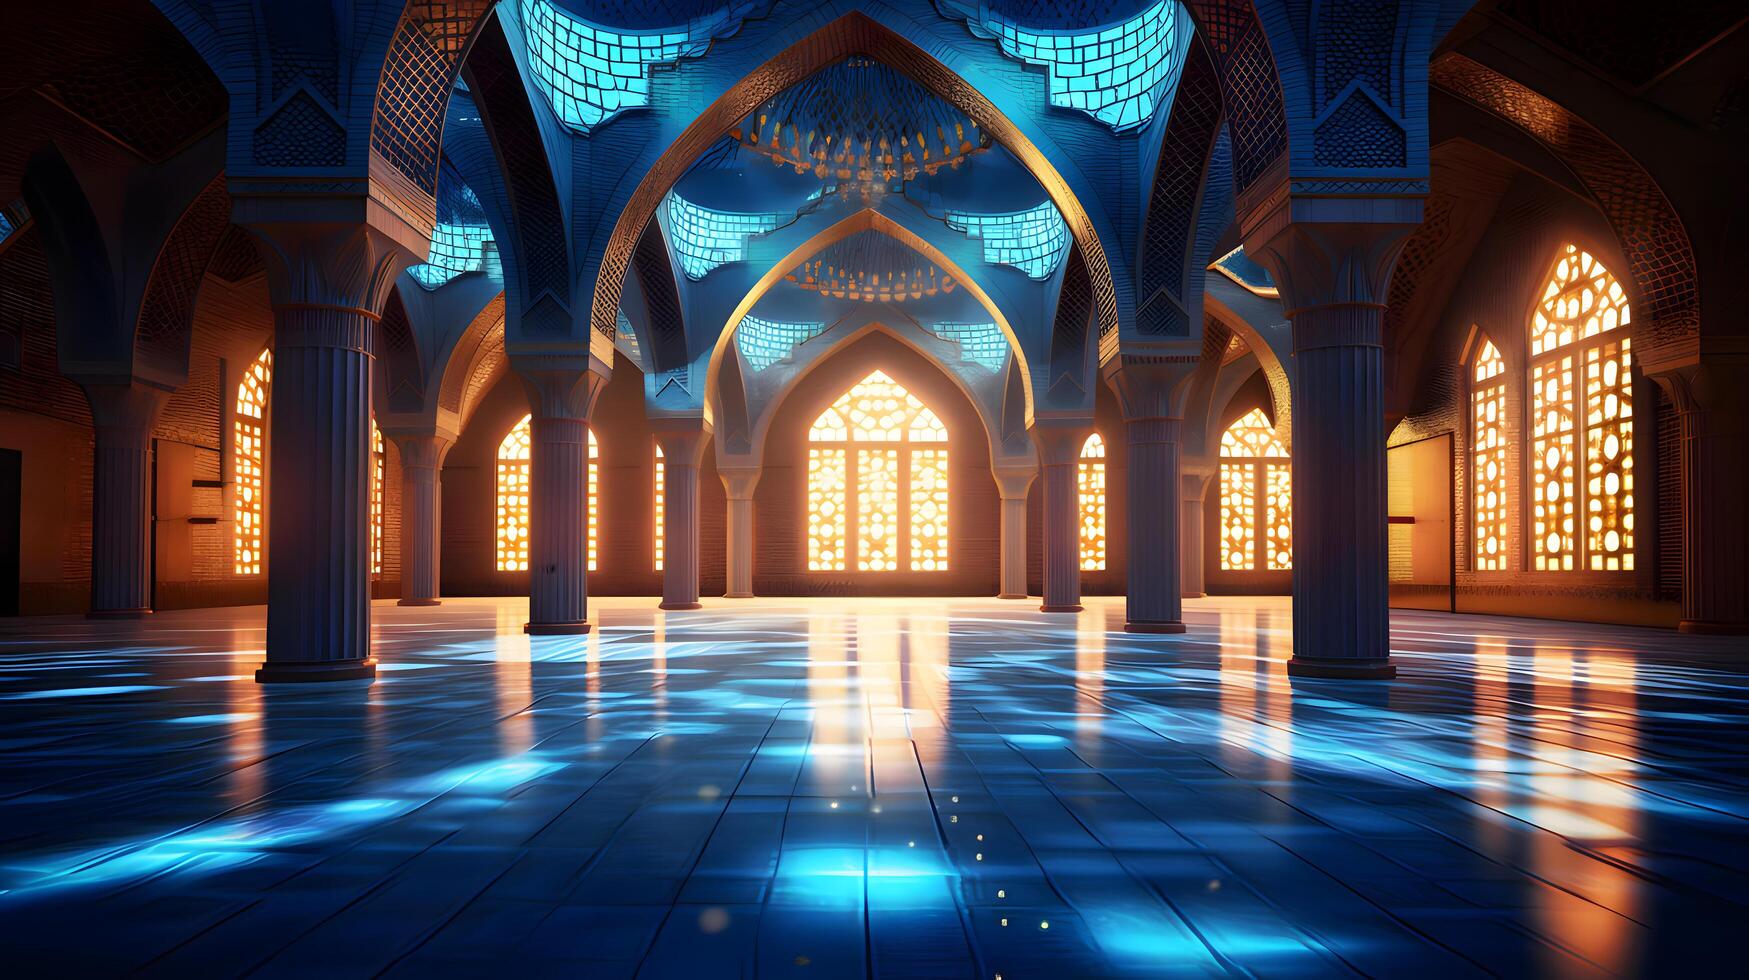 Islamic architecture, Mosque Interior created using Technology photo